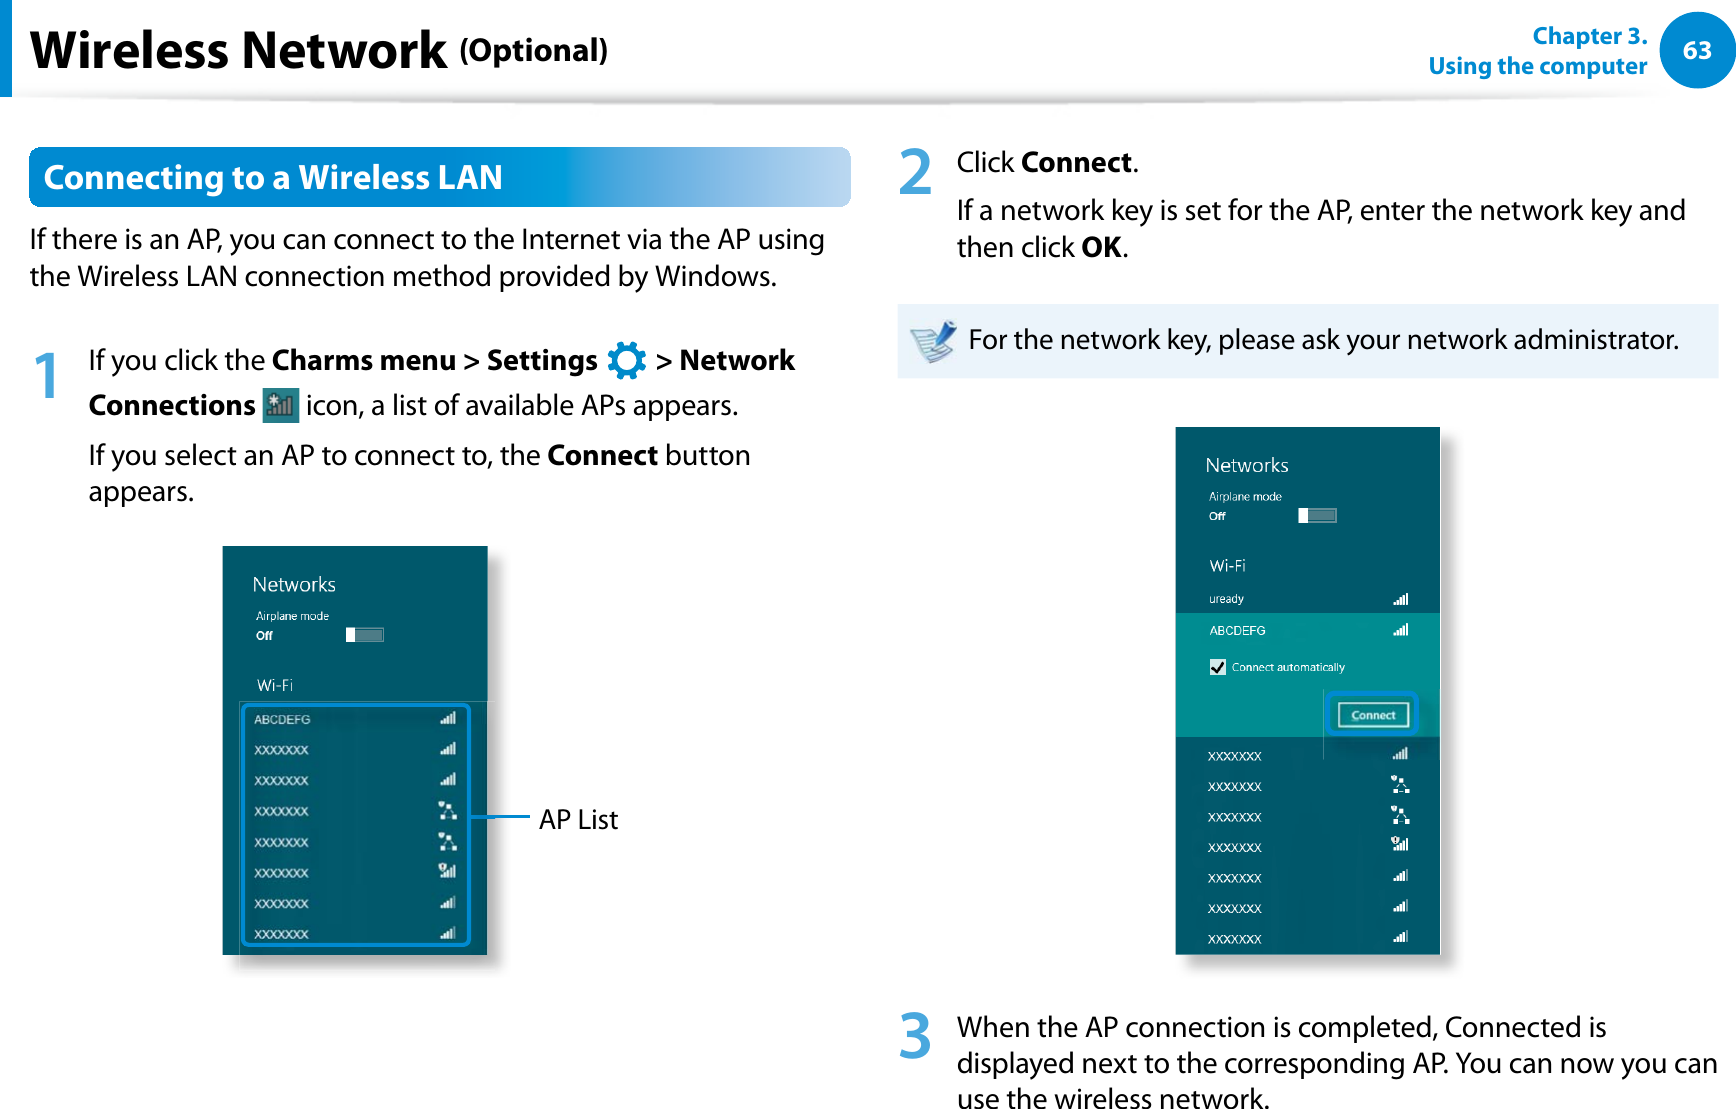 63Chapter 3.  Using the computerWireless Network (Optional)Connecting to a Wireless LANIf there is an AP, you can connect to the Internet via the AP using the Wireless LAN connection method provided by Windows.1  If you click the Charms menu &gt; Settings   &gt; Network Connections  icon, a list of available APs appears.If you select an AP to connect to, the Connect button appears.AP List2 Click Connect.If a network key is set for the AP, enter the network key and then click OK.For the network key, please ask your network administrator.3  When the AP connection is completed, Connected is displayed next to the corresponding AP. You can now you can use the wireless network.